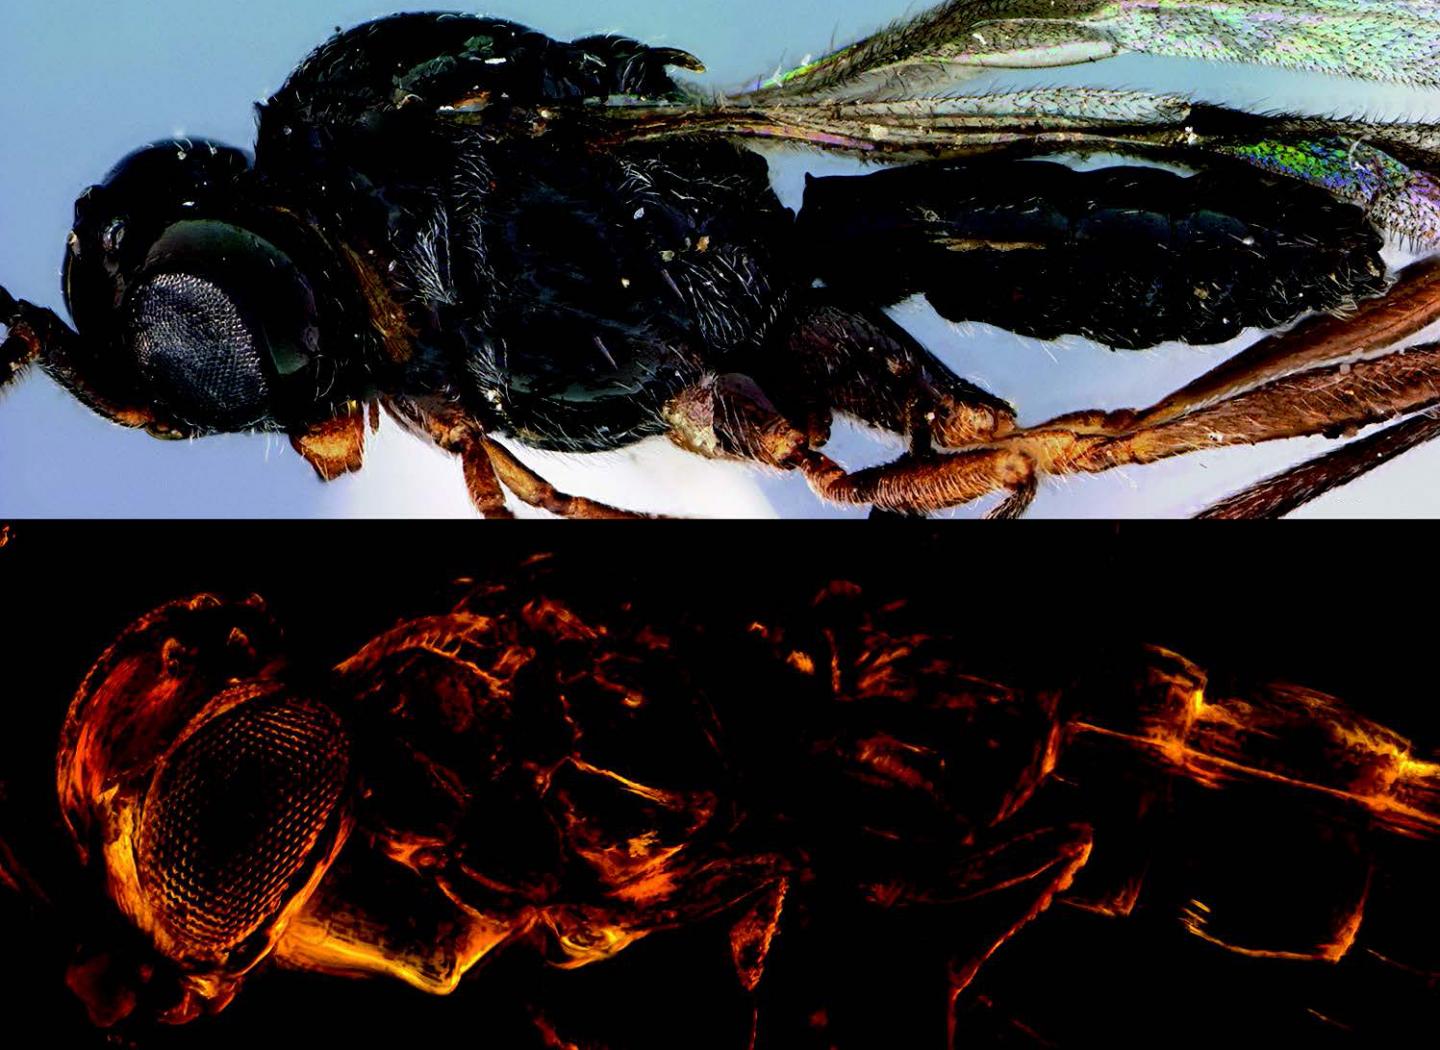 Modern Archaeoteleia Species (Top) Compared to Its New Ancient Relative (Bottom)